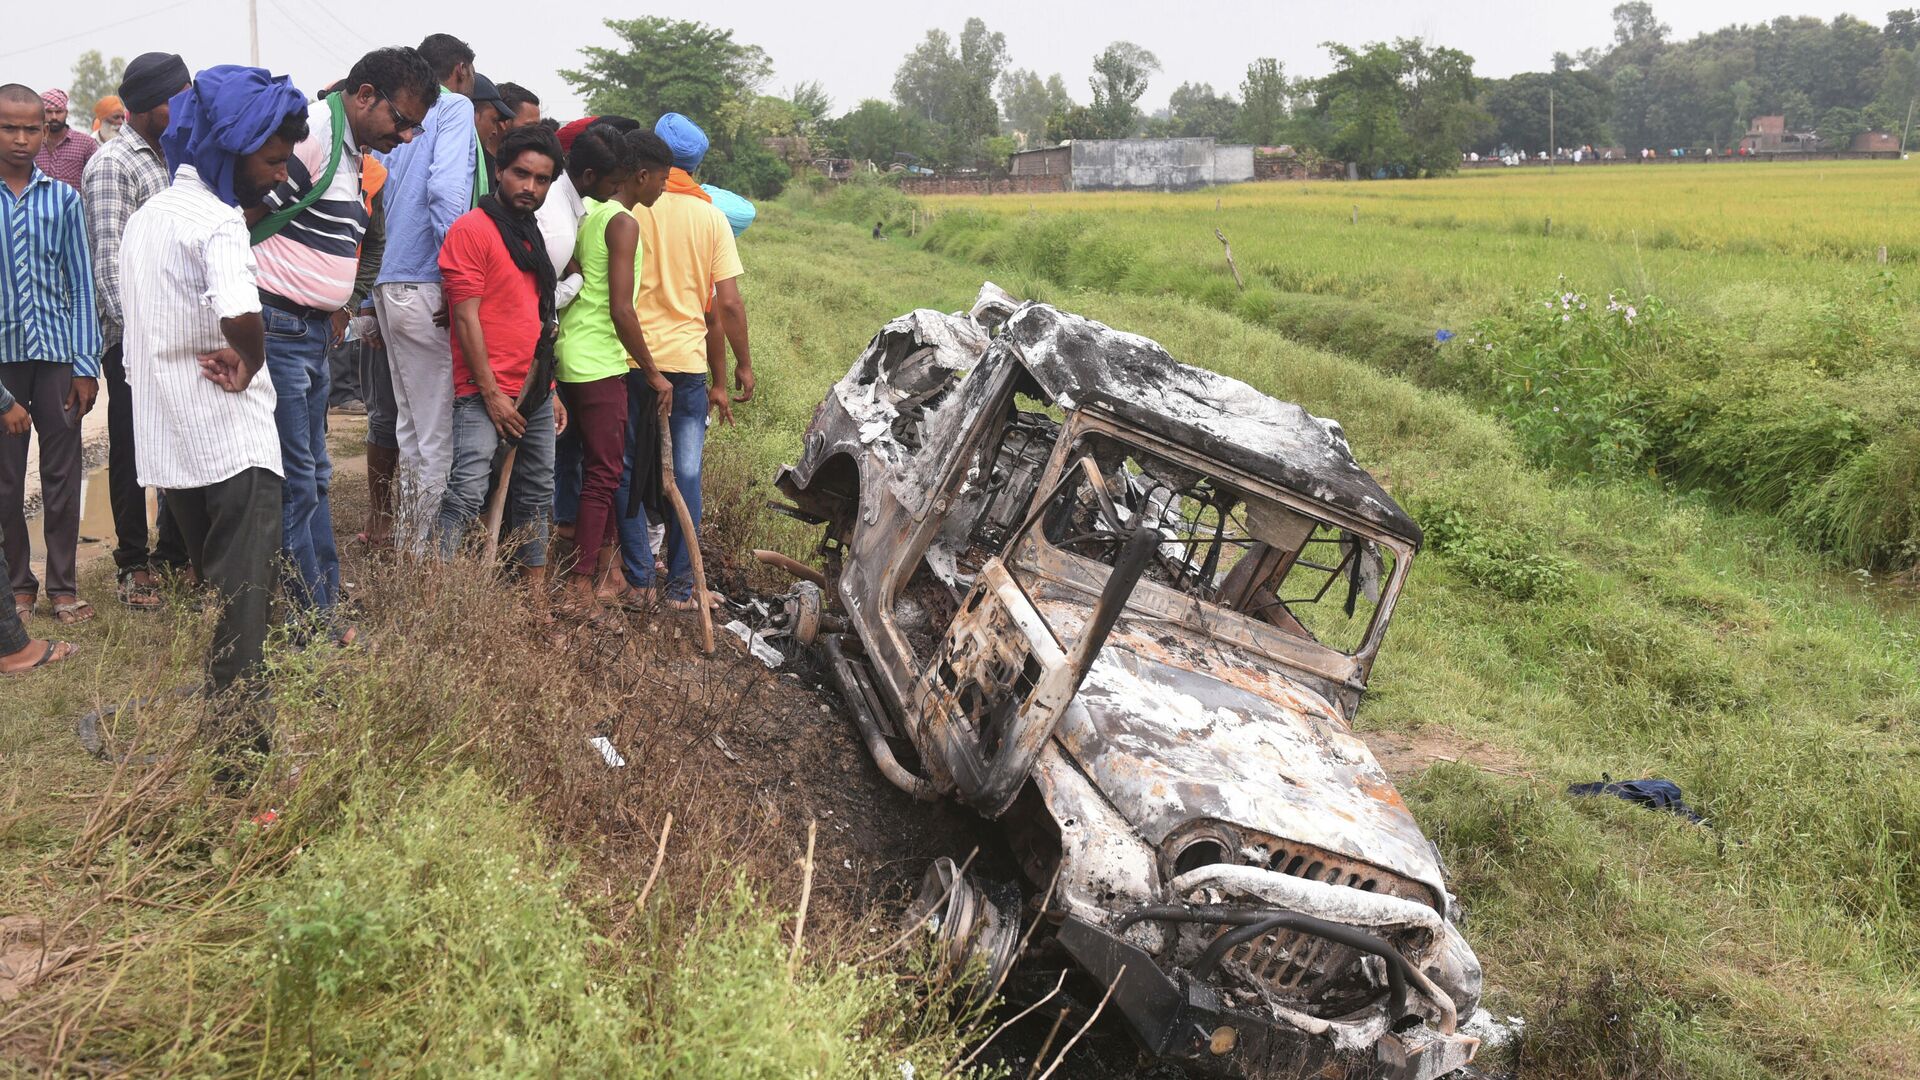 Villagers watch a burnt car which run over and killed farmers on Sunday, at Tikonia village in Lakhimpur Kheri, Uttar Pradesh state, India, Monday, Oct. 4, 2021 - Sputnik International, 1920, 07.10.2021